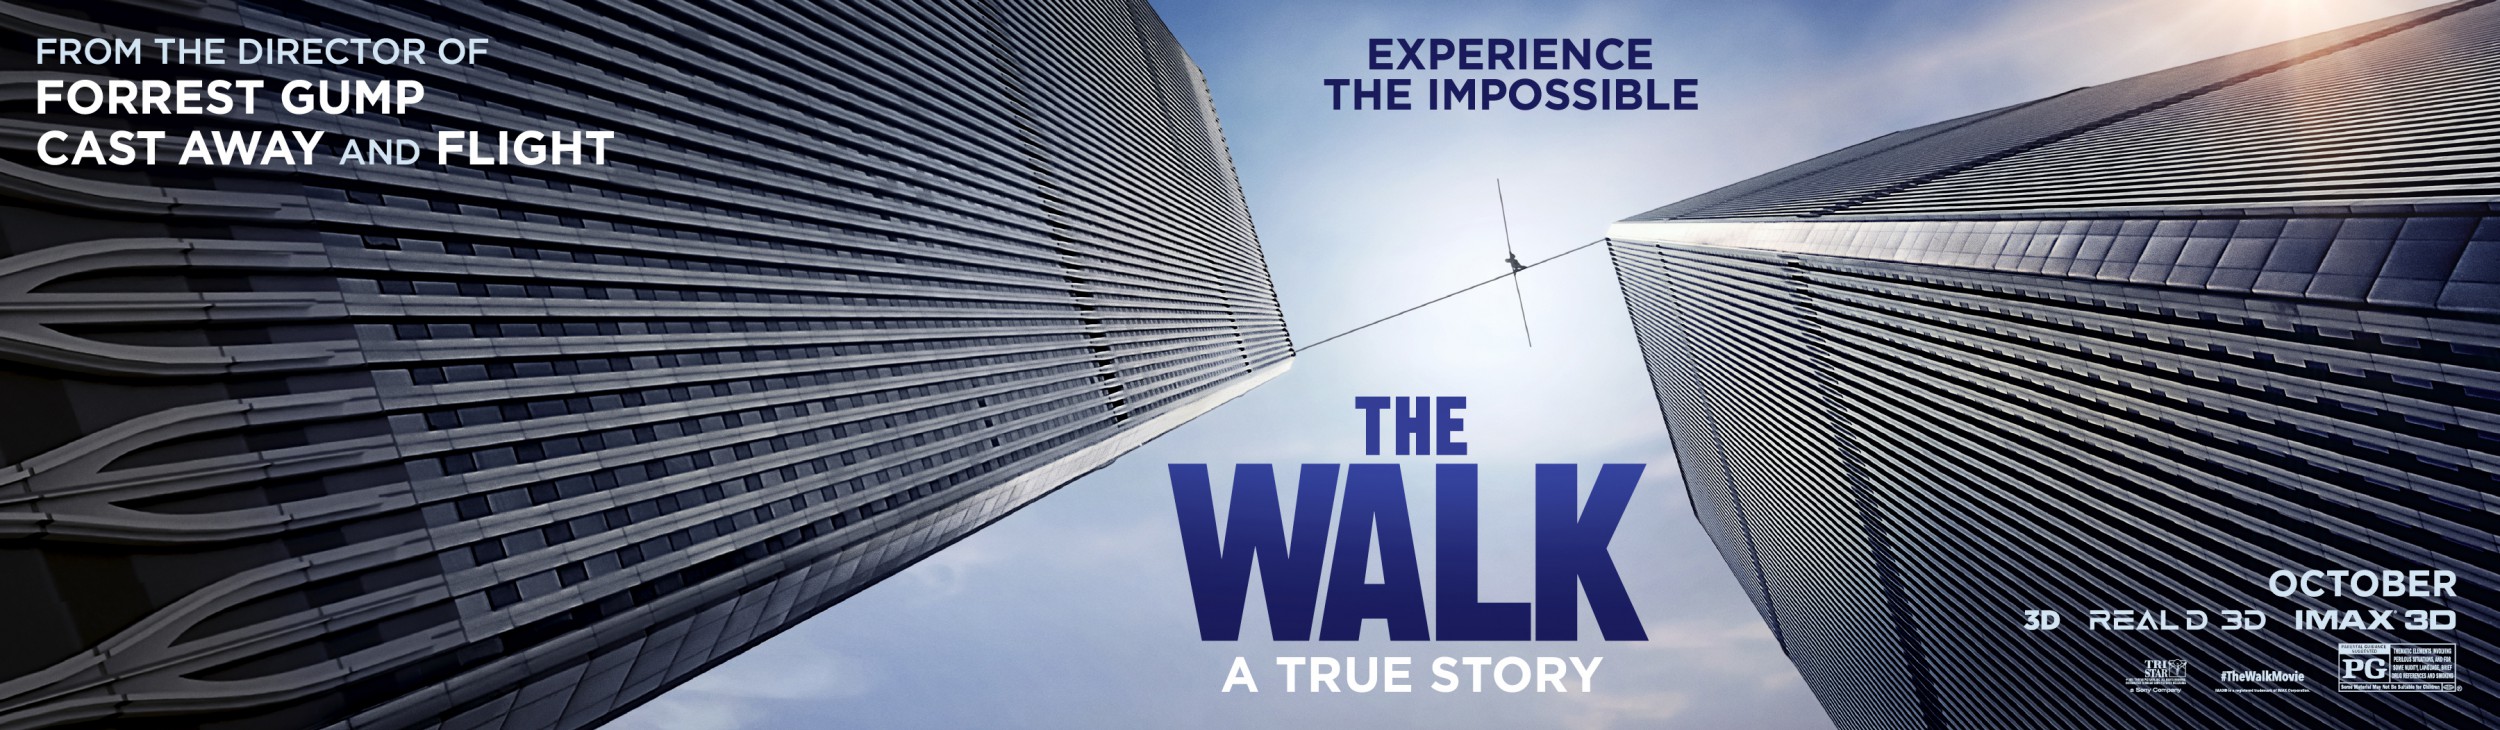 Mega Sized Movie Poster Image for The Walk (#4 of 6)